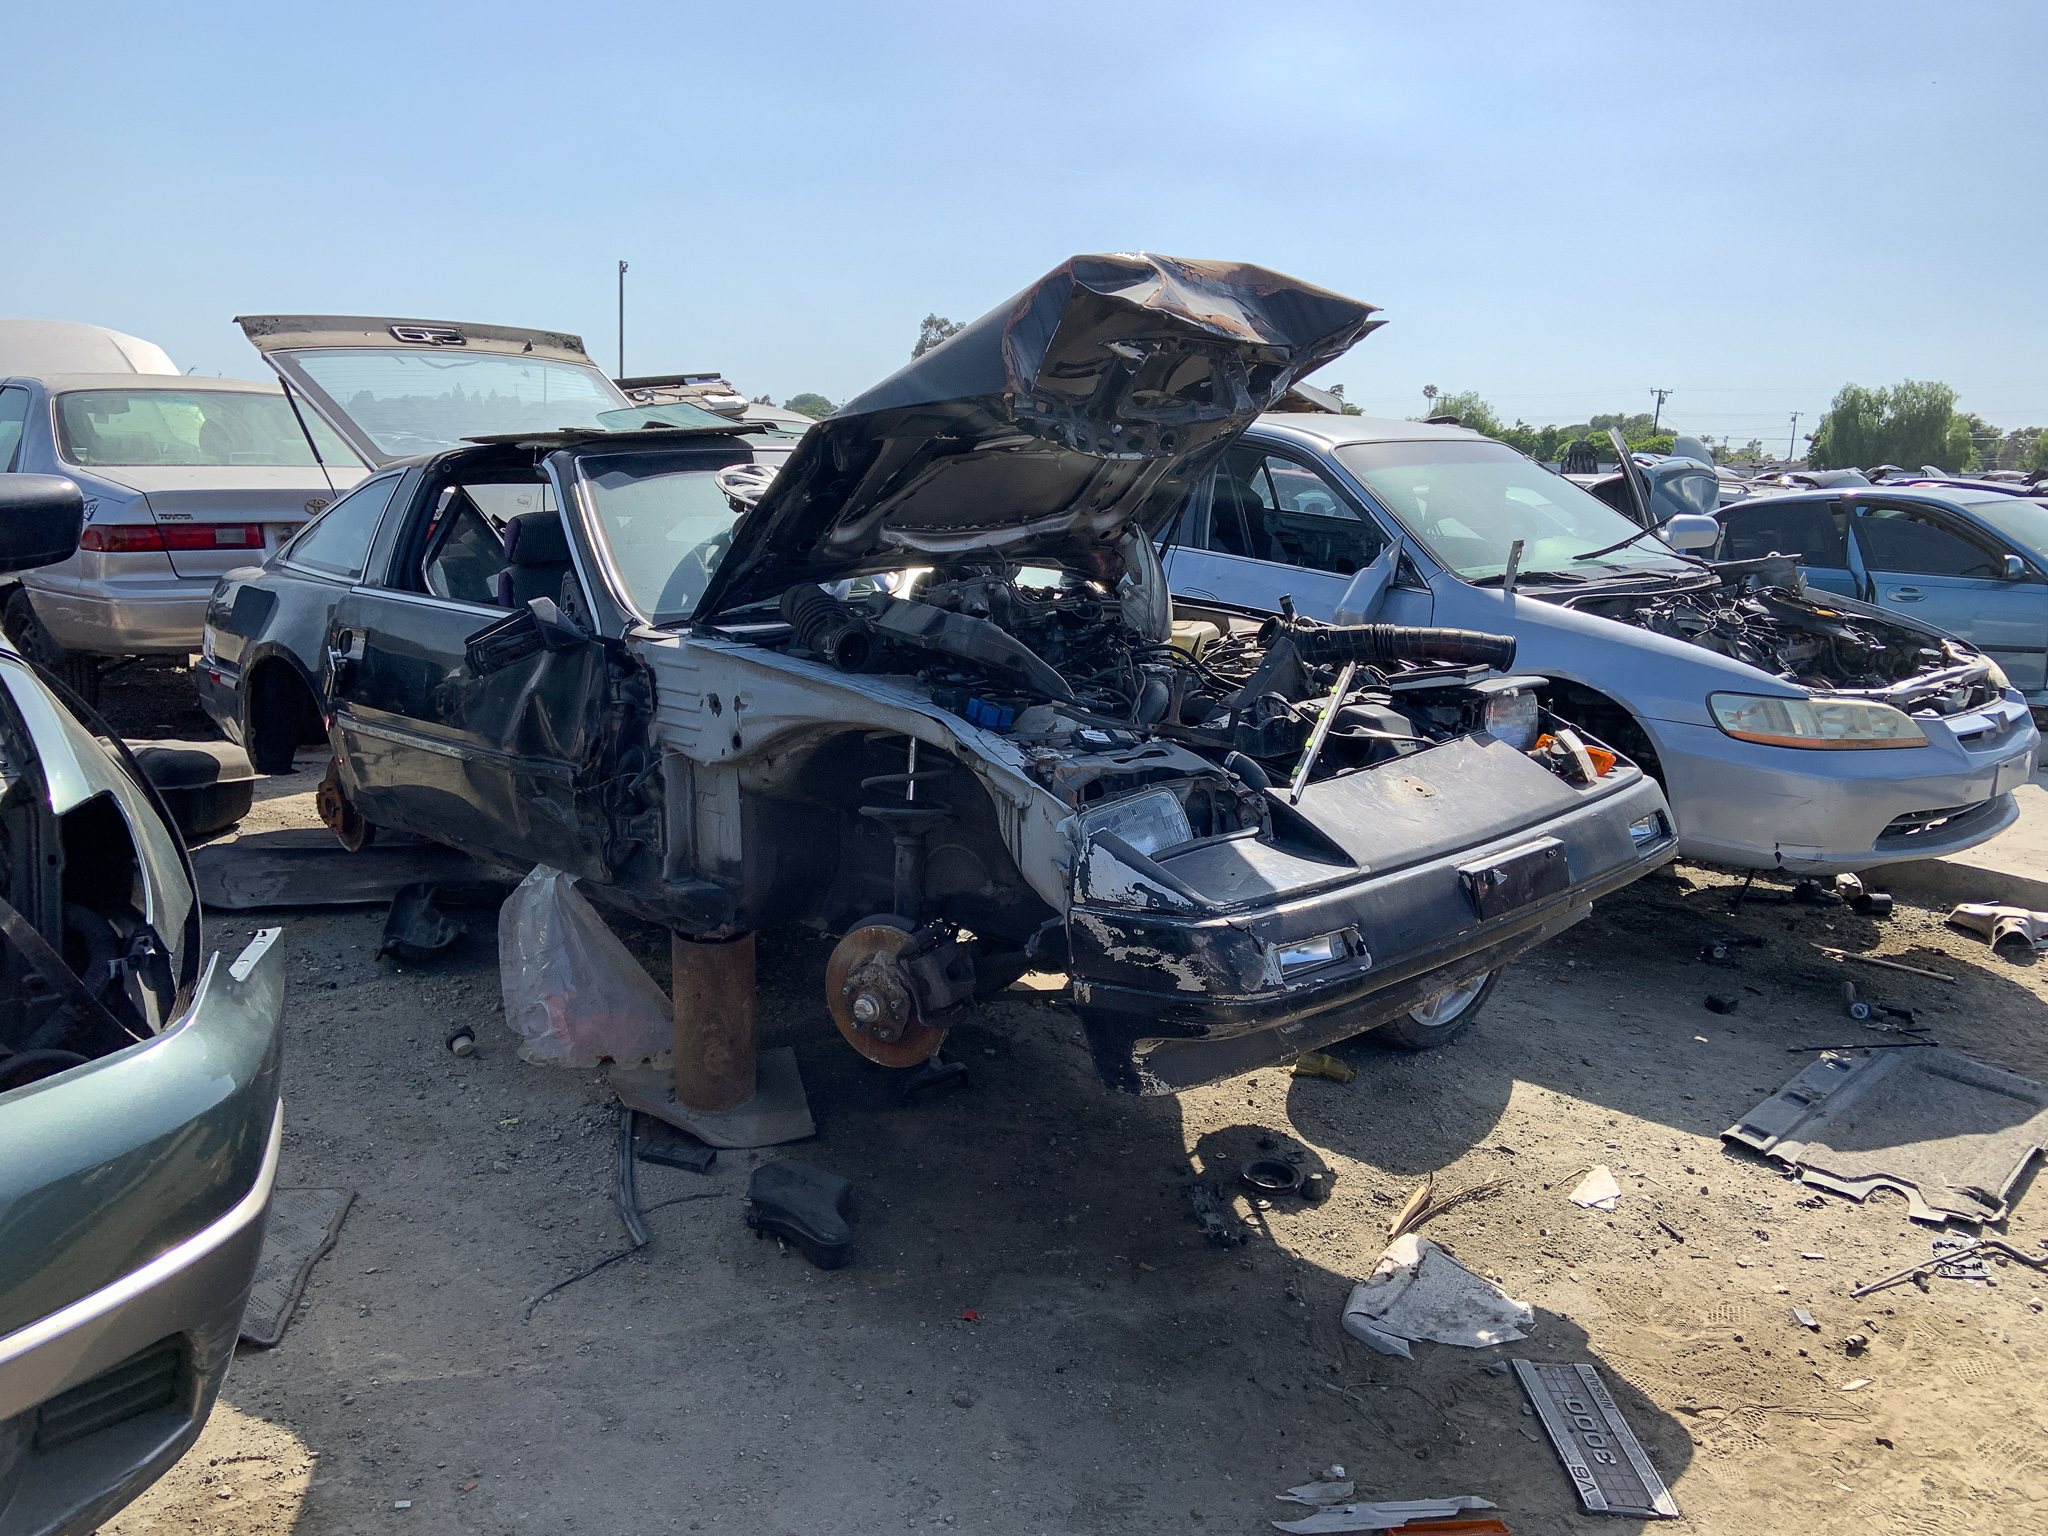 Here’s What Junkyard Shopping In America Is Like During The Pandemic